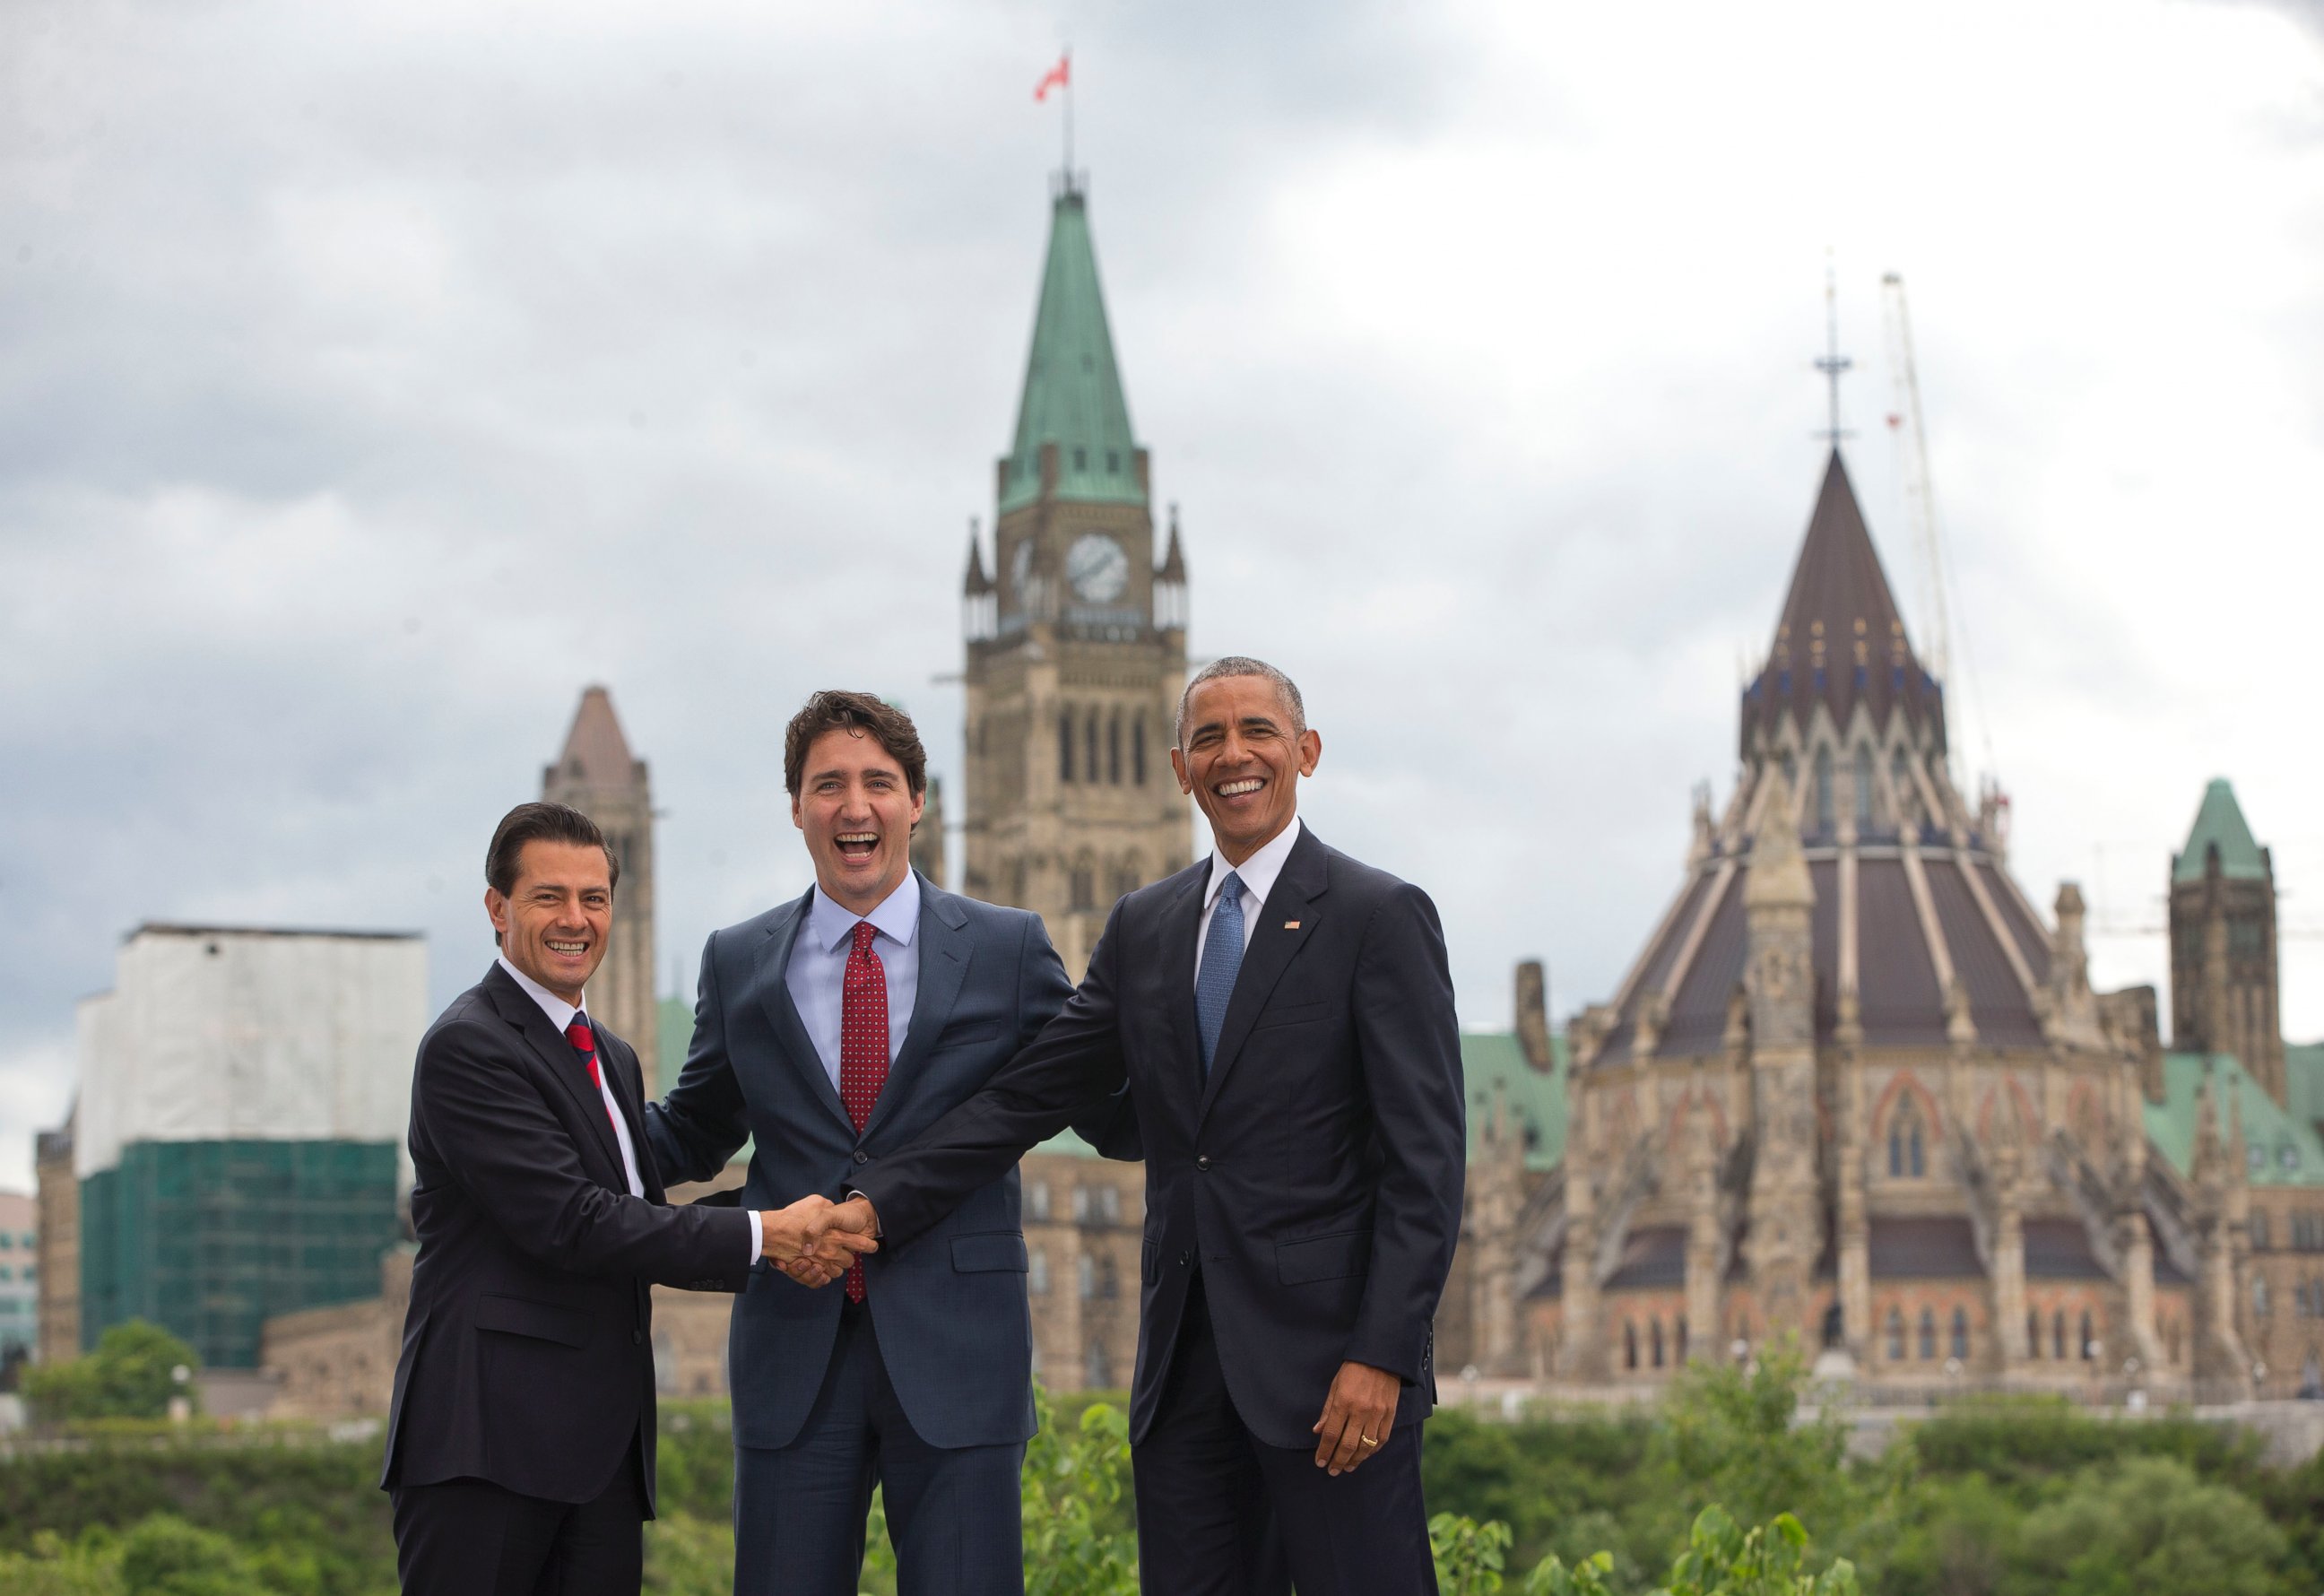 PHOTO: (L-R) Mexican President Enrique Pena Neito Mexican President Enrique Pena Neito and President Barack Obama stand in front of Parliament Hill for a group photo during the North America Leaders' Summit,  June 29, 2016, in Ottawa, Canada.